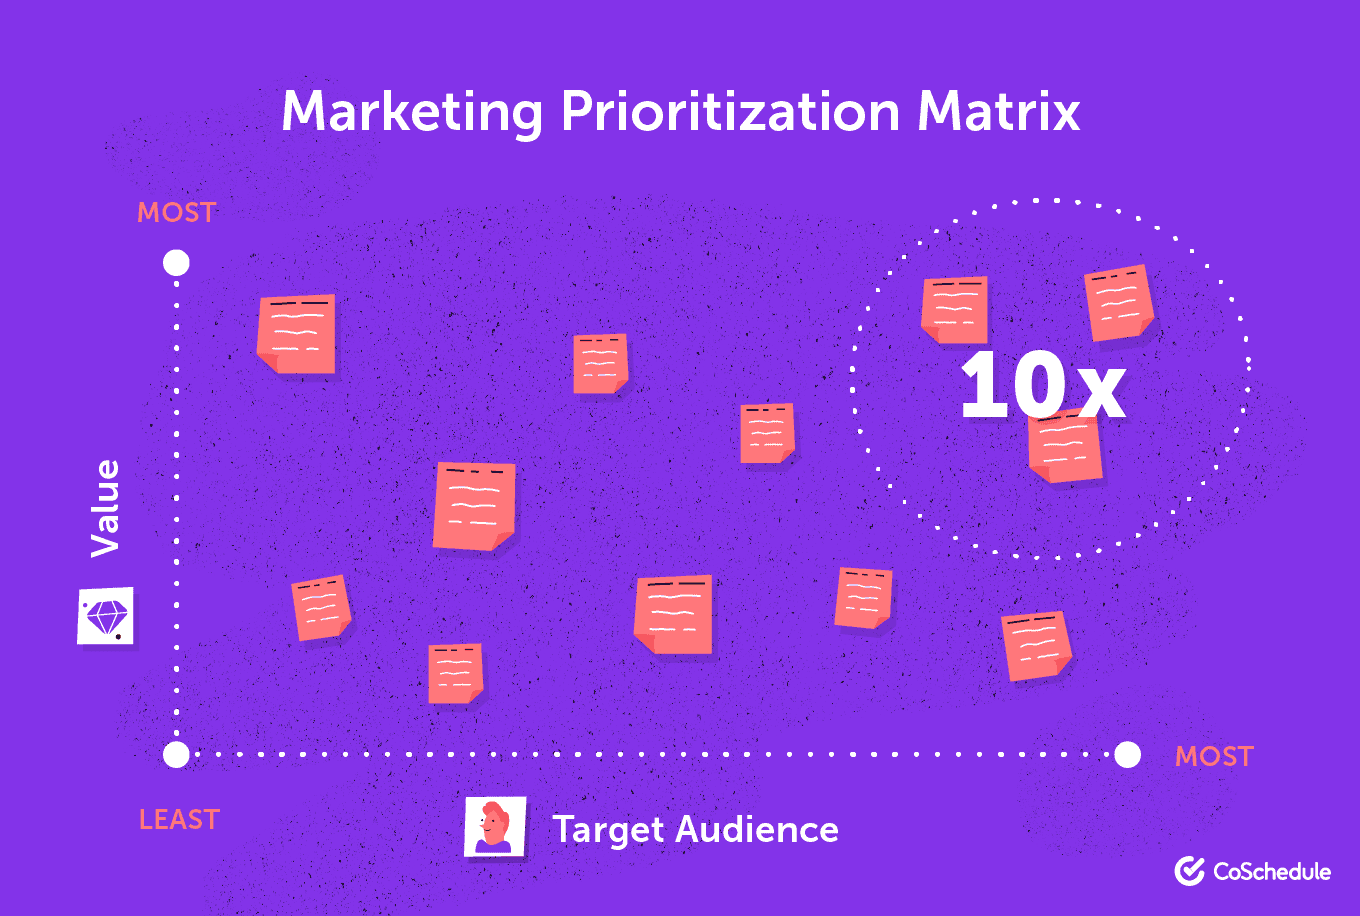 View of the marketing prioritization matrix presented by CoSchedule.